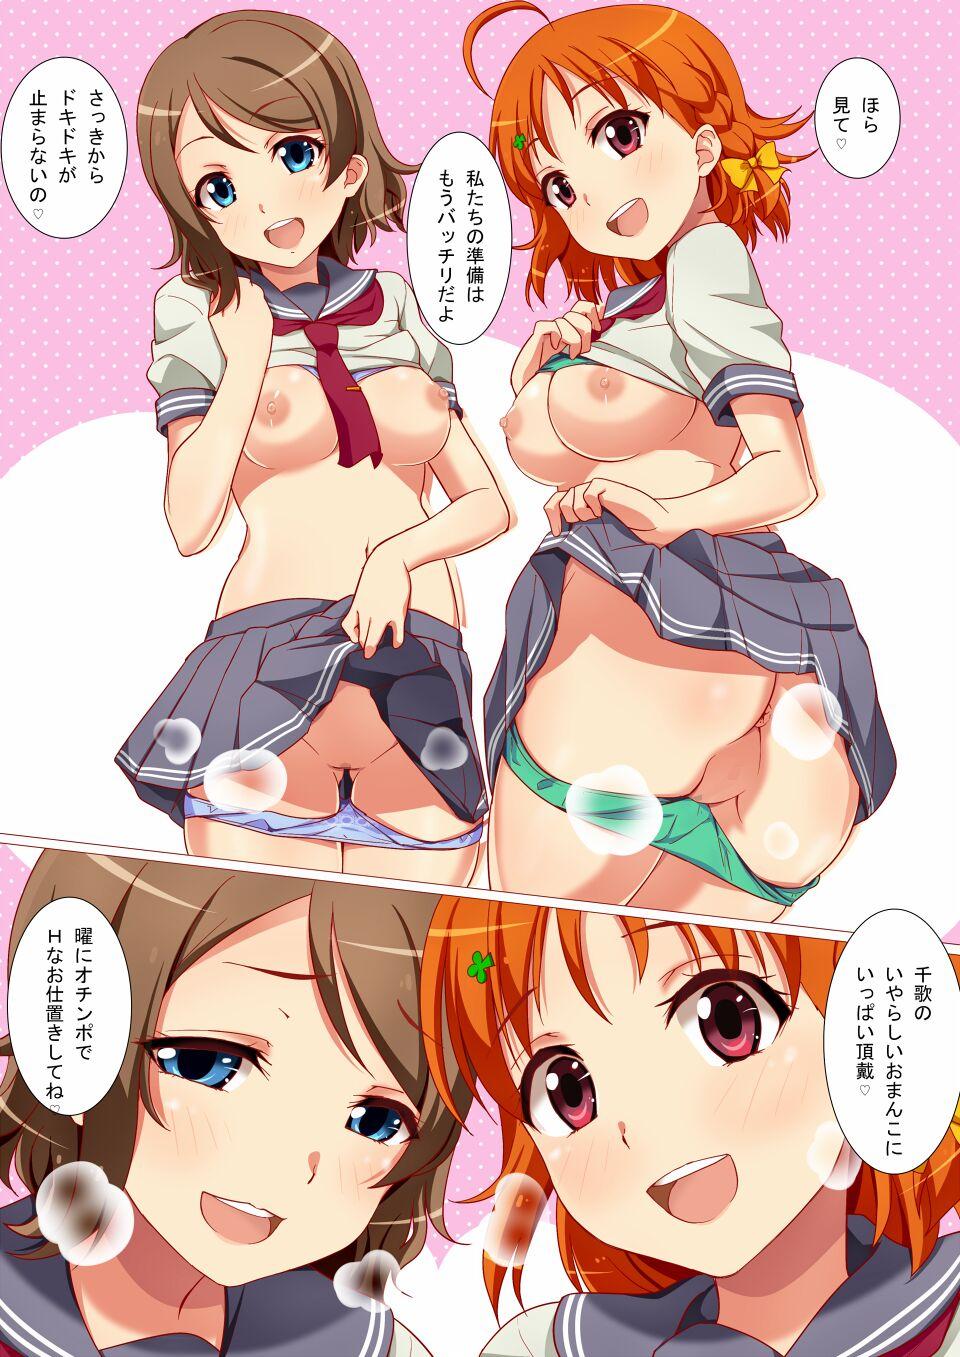 Gloryhole Morning flirting between two people - Love live sunshine Top - Page 11